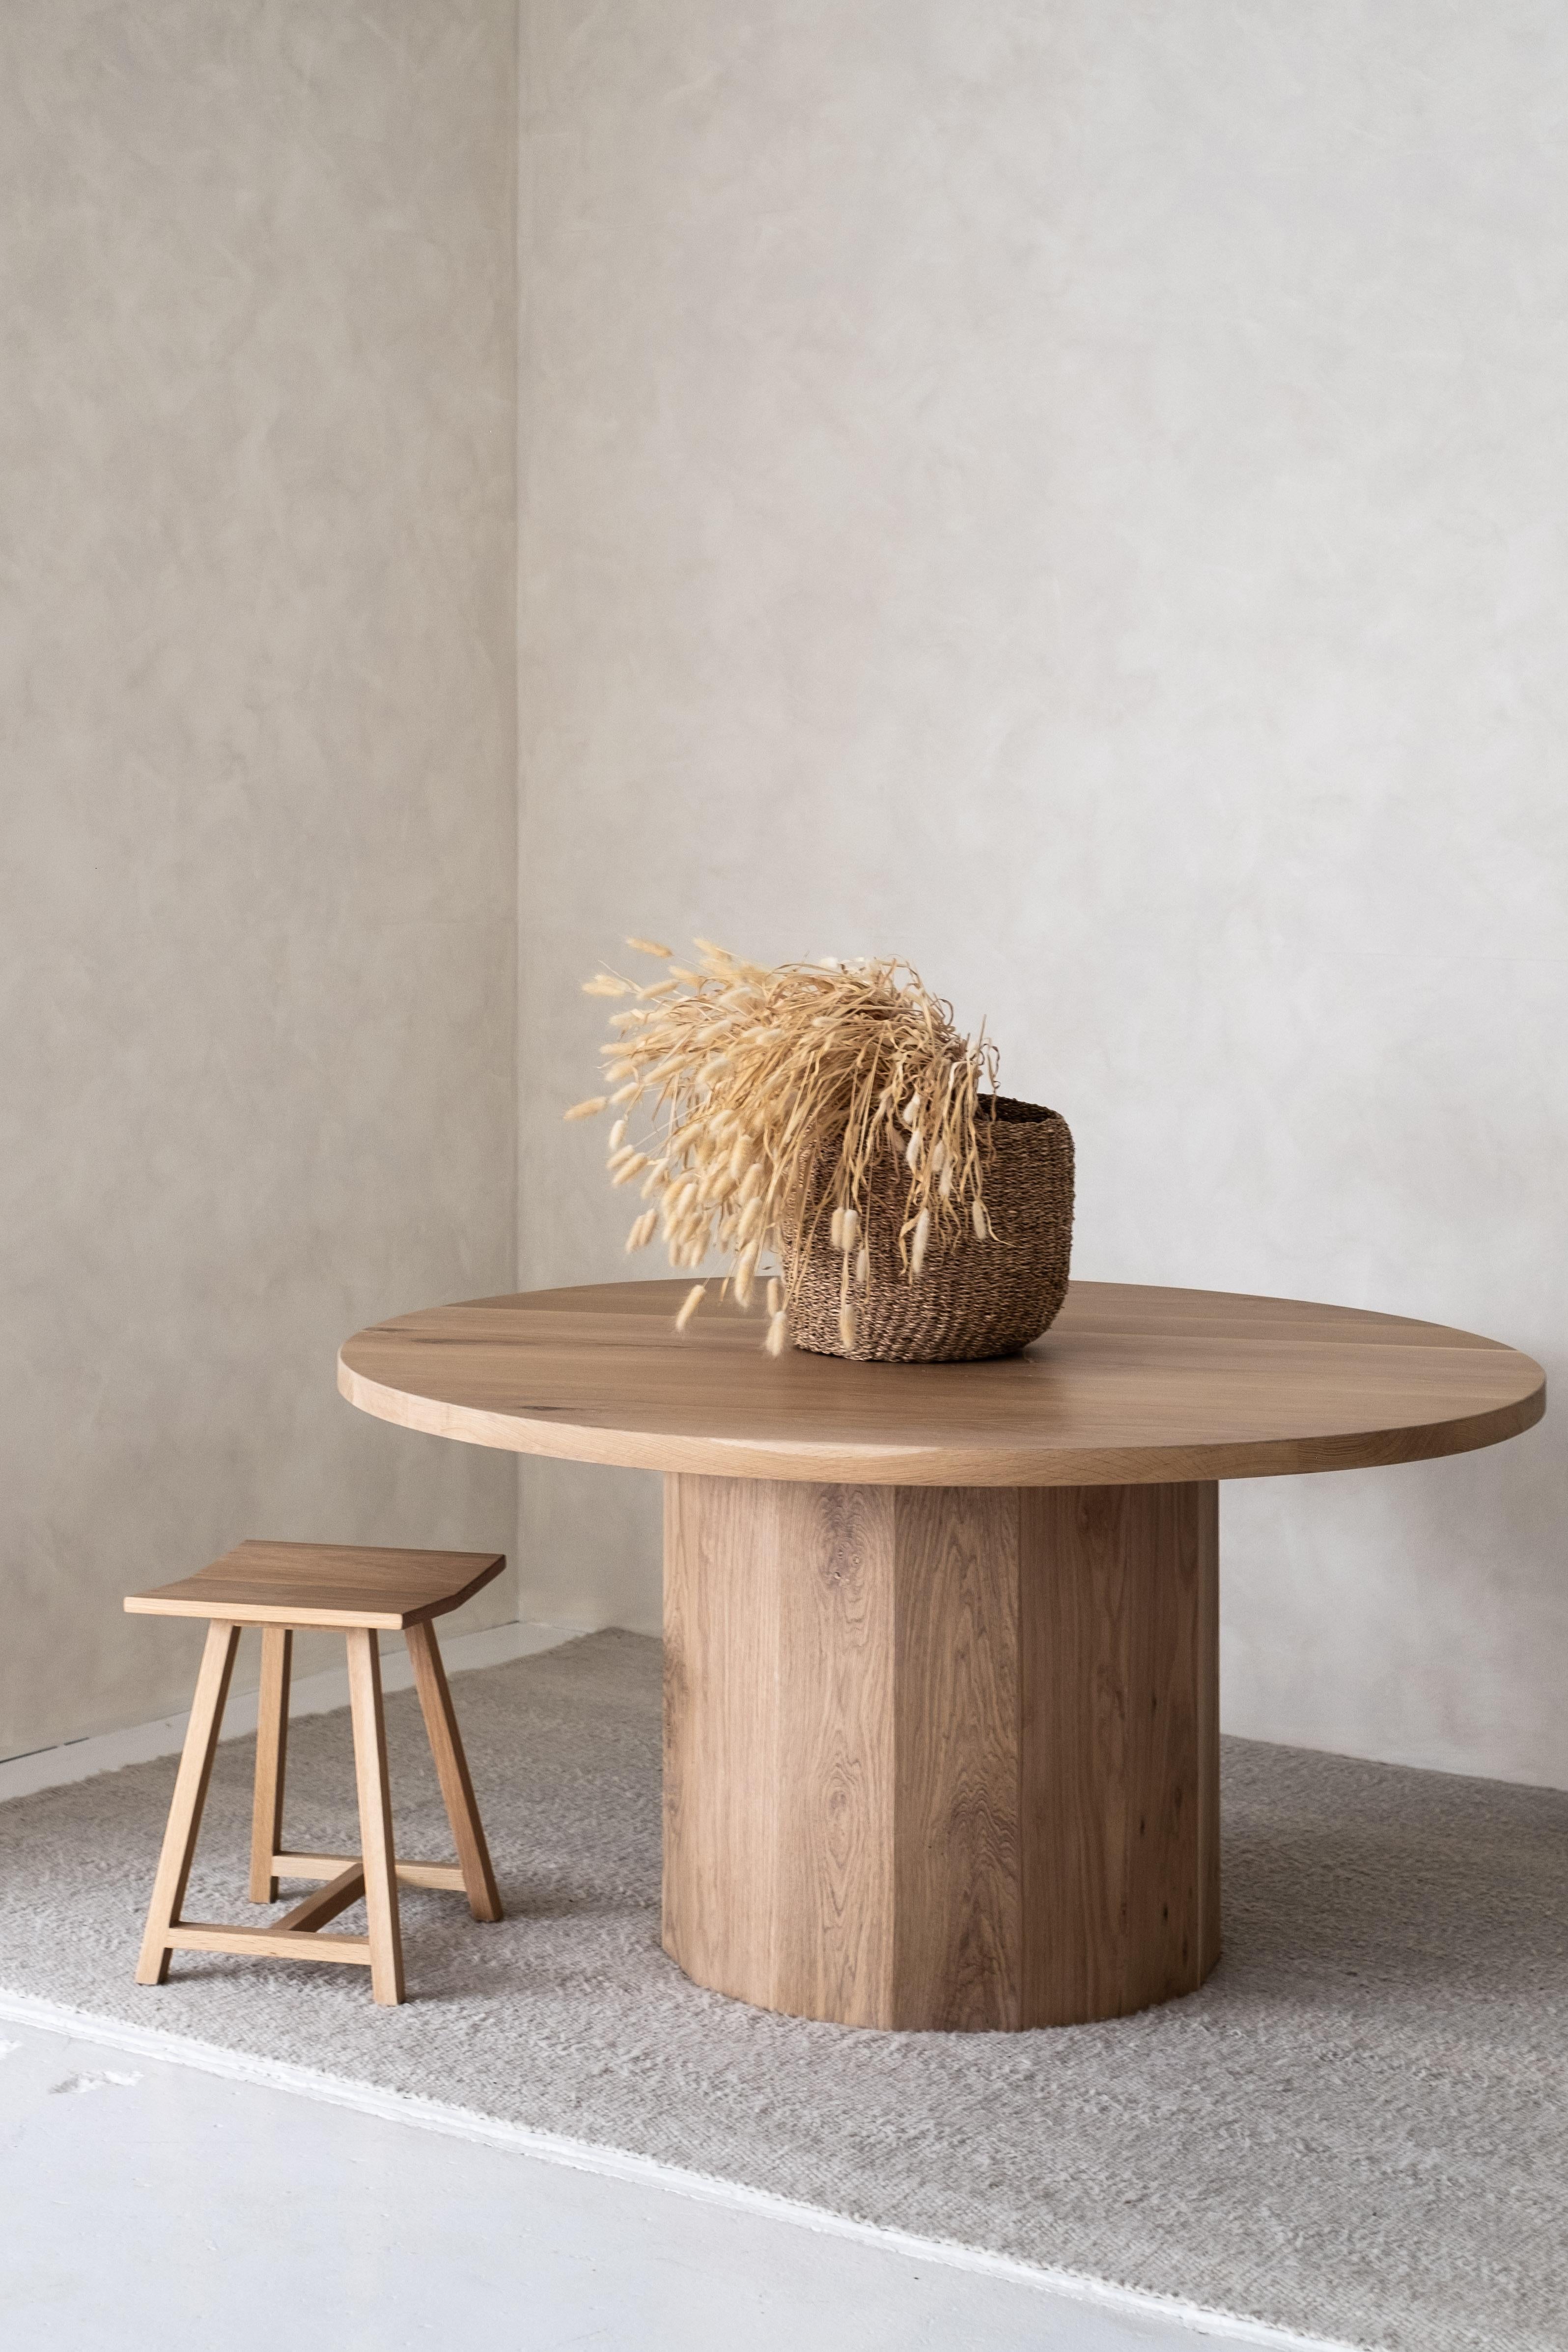 Inspired by the cellar, this round dining table brings warm sophistication to any home or office space. A timber masterpiece, the Barrel Table features a 40mm thick oak top and precisely joined circular base, a Classic yet contemporary piece equally